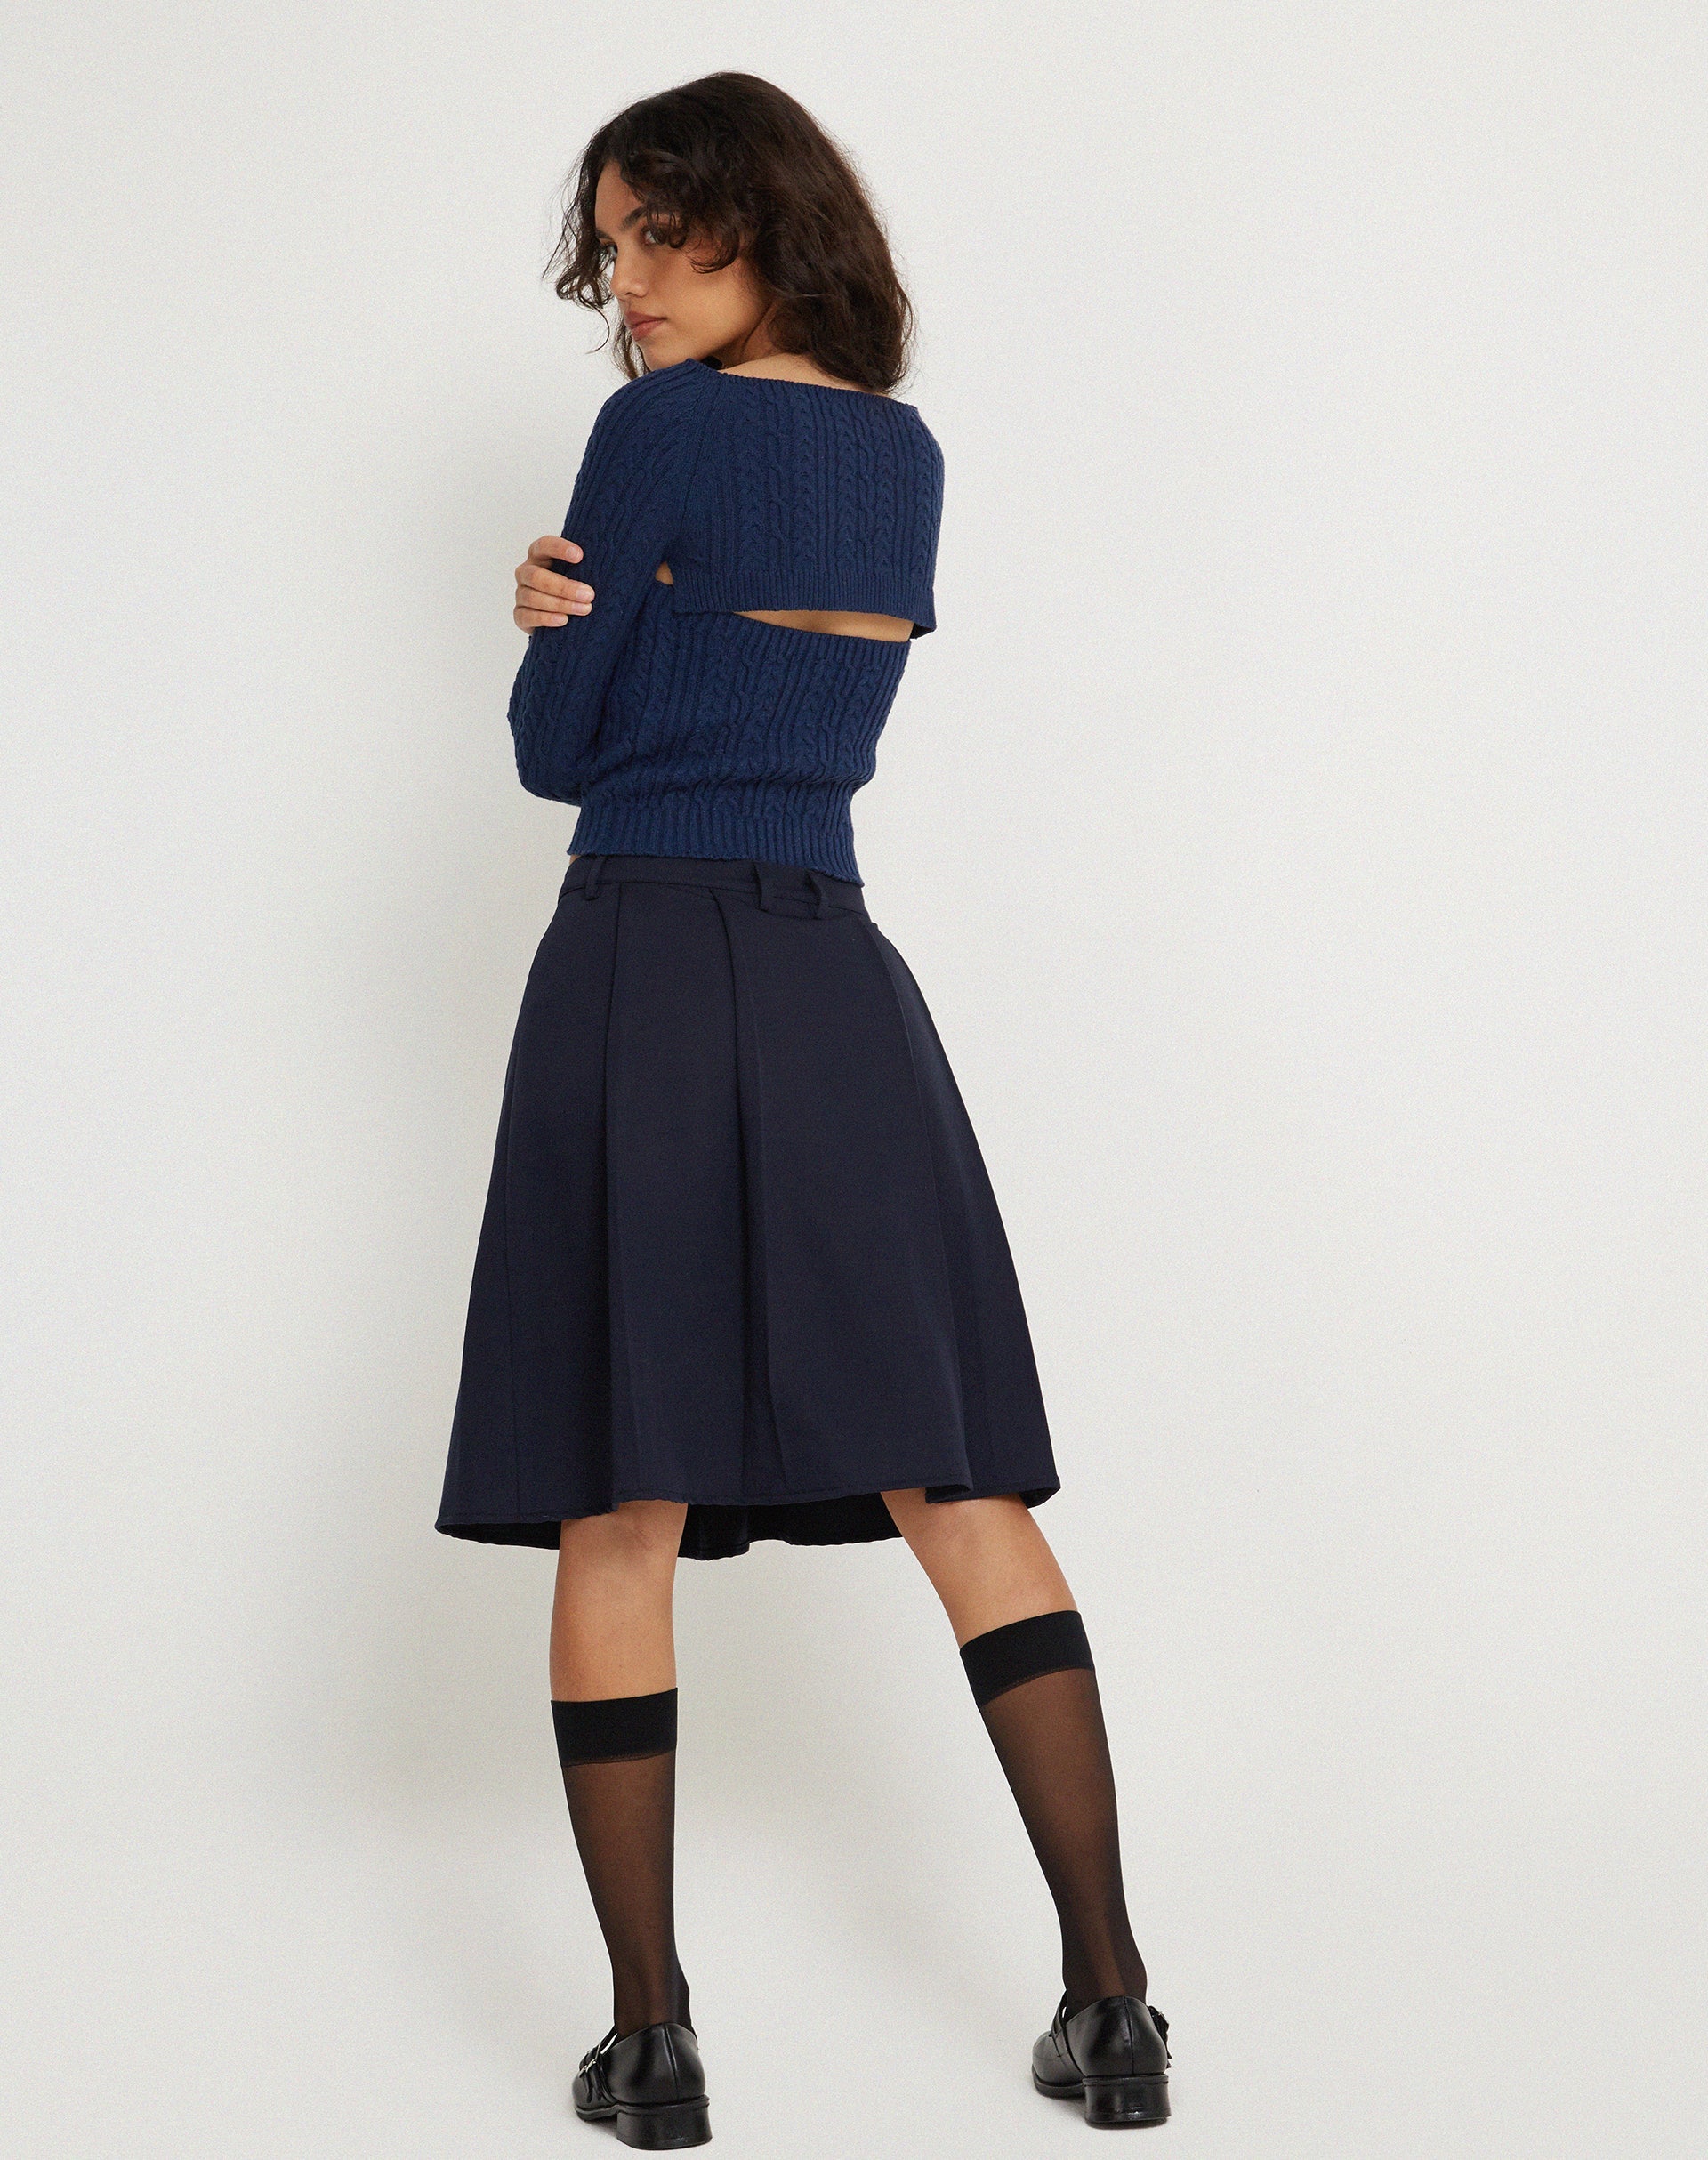 image of Canita Arinah Long Sleeve Co-Ord Top in Navy Blue